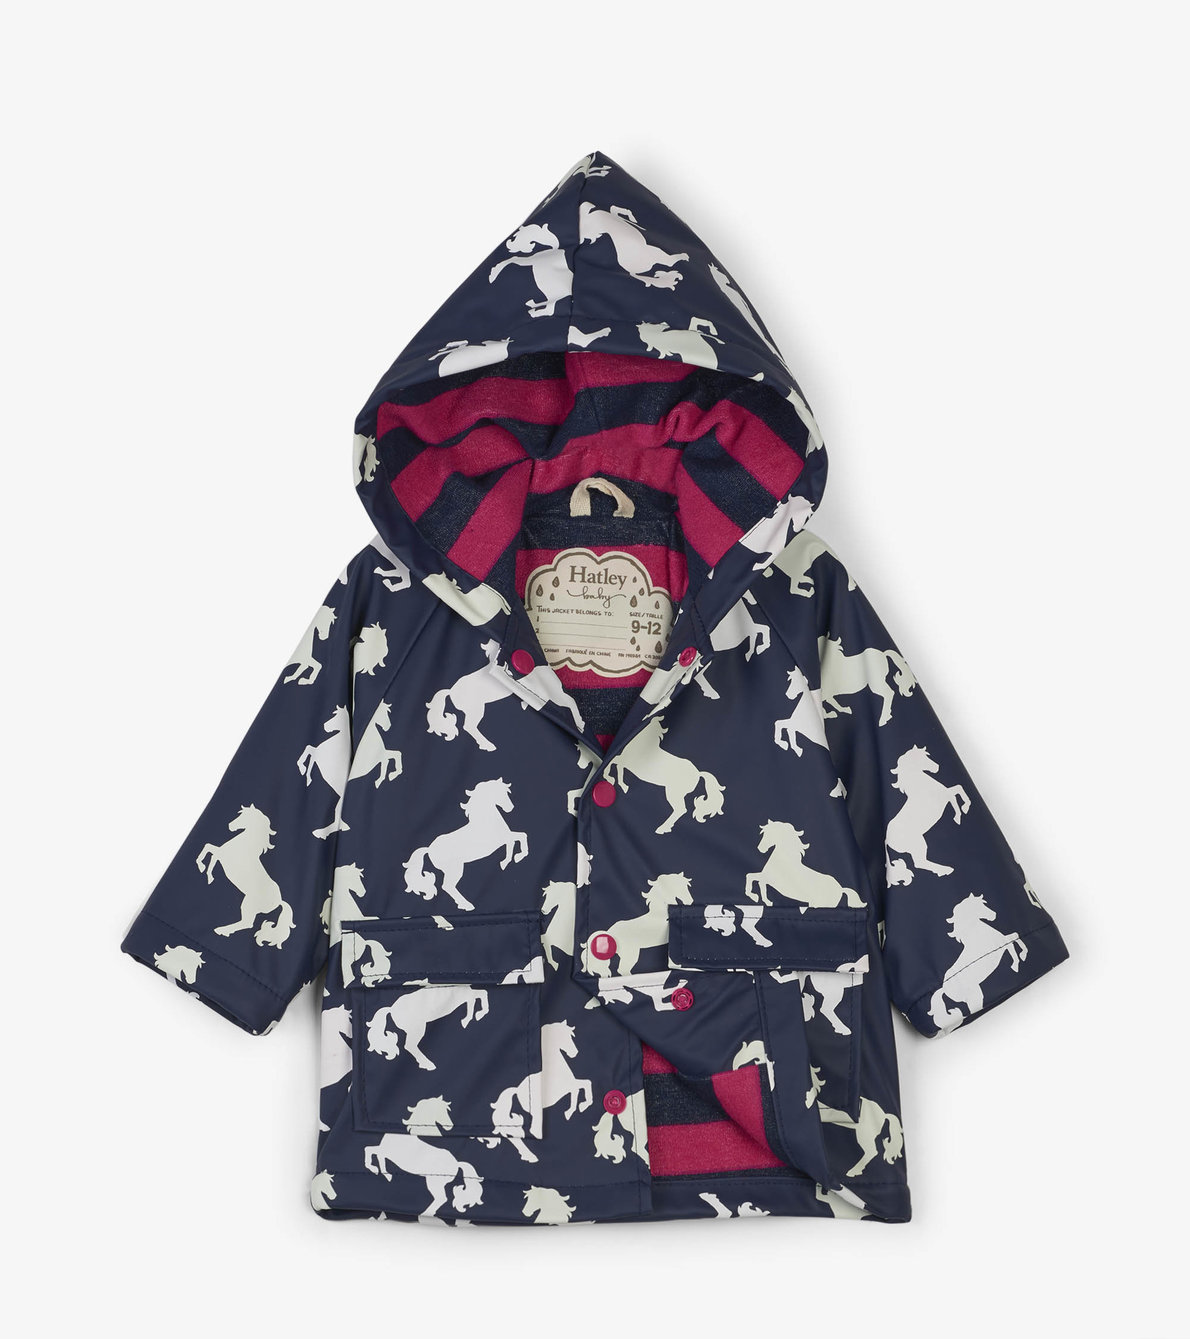 View larger image of Playful Horses Colour Changing Baby Raincoat